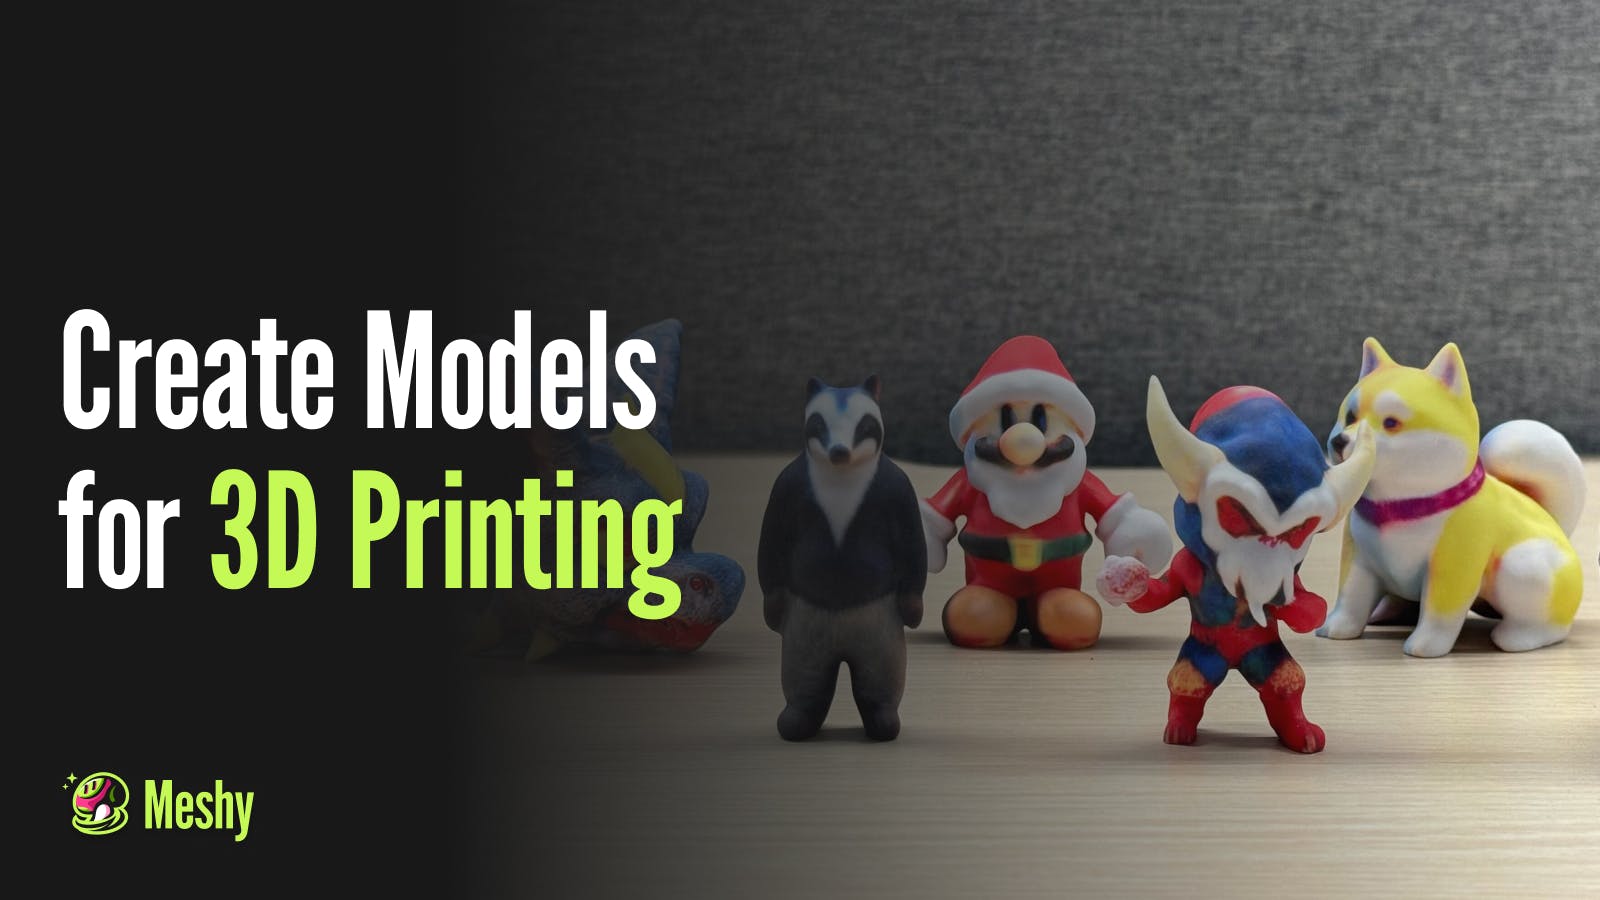 How to Create 3D Models for Printing Using Meshy?